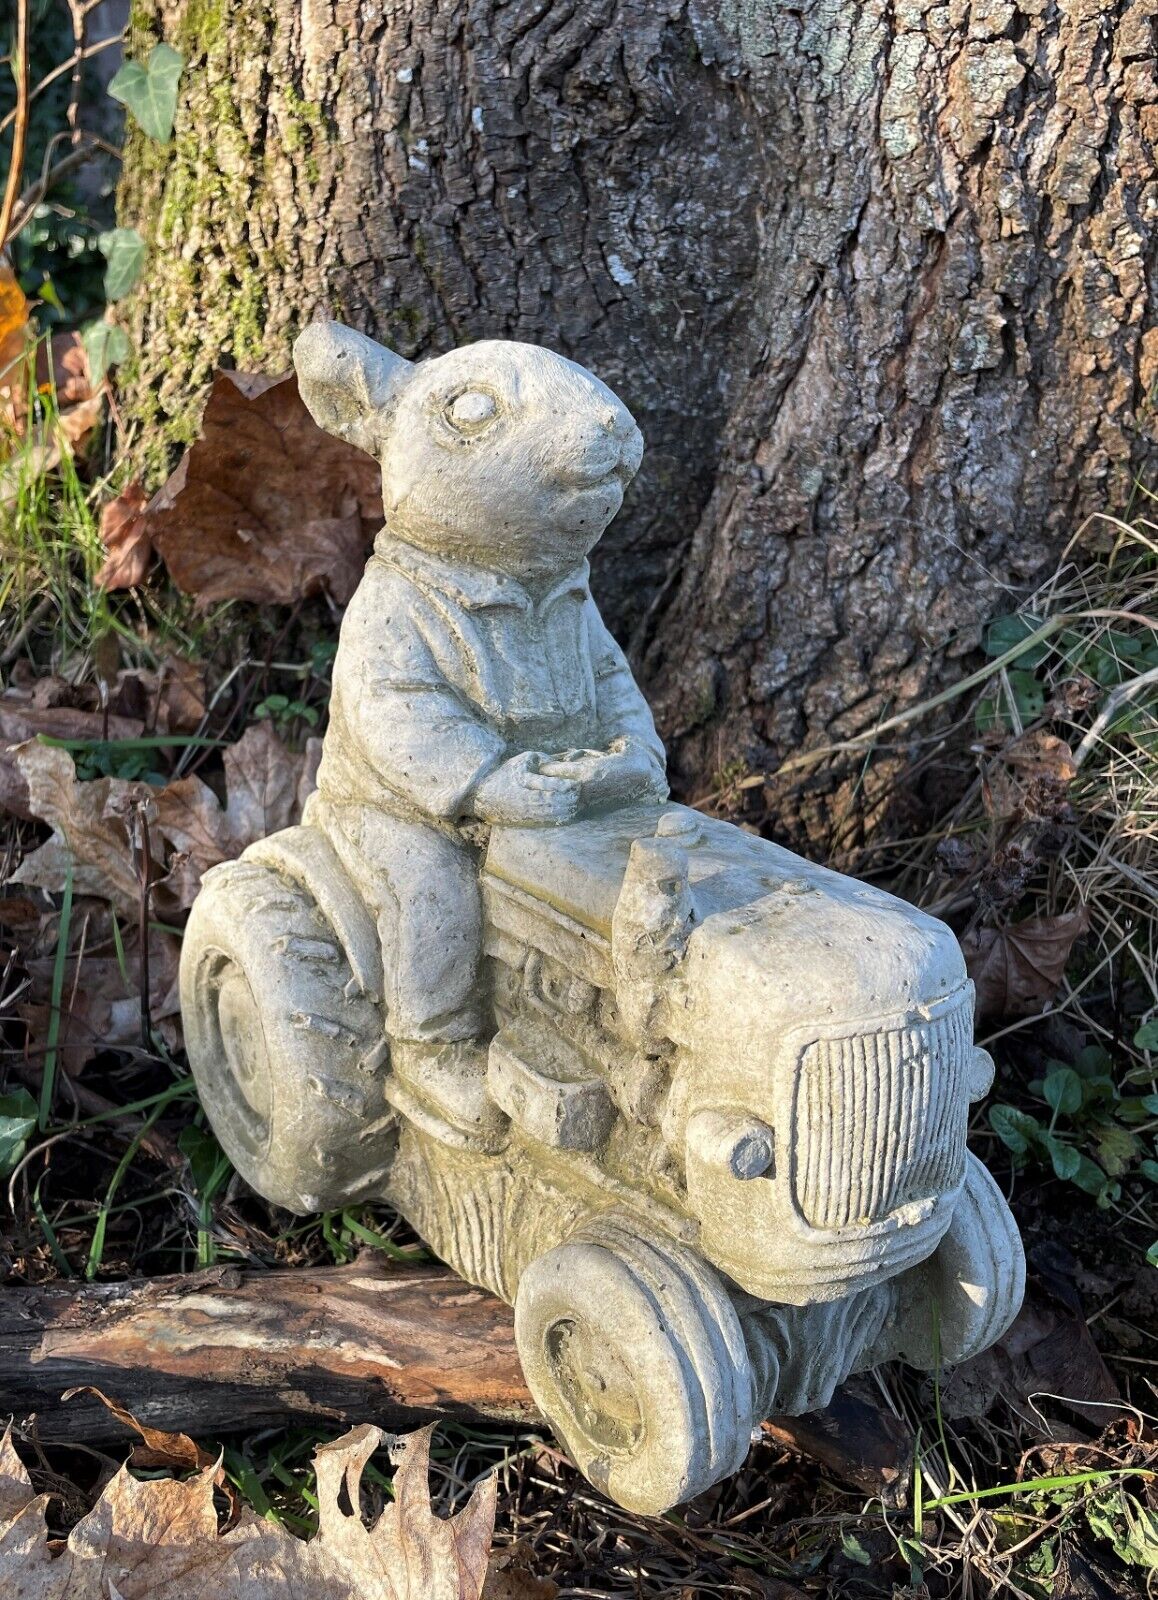 A rabbit with waist-coat riding an antique style tractor. Situated in a British garden in front of a tree.